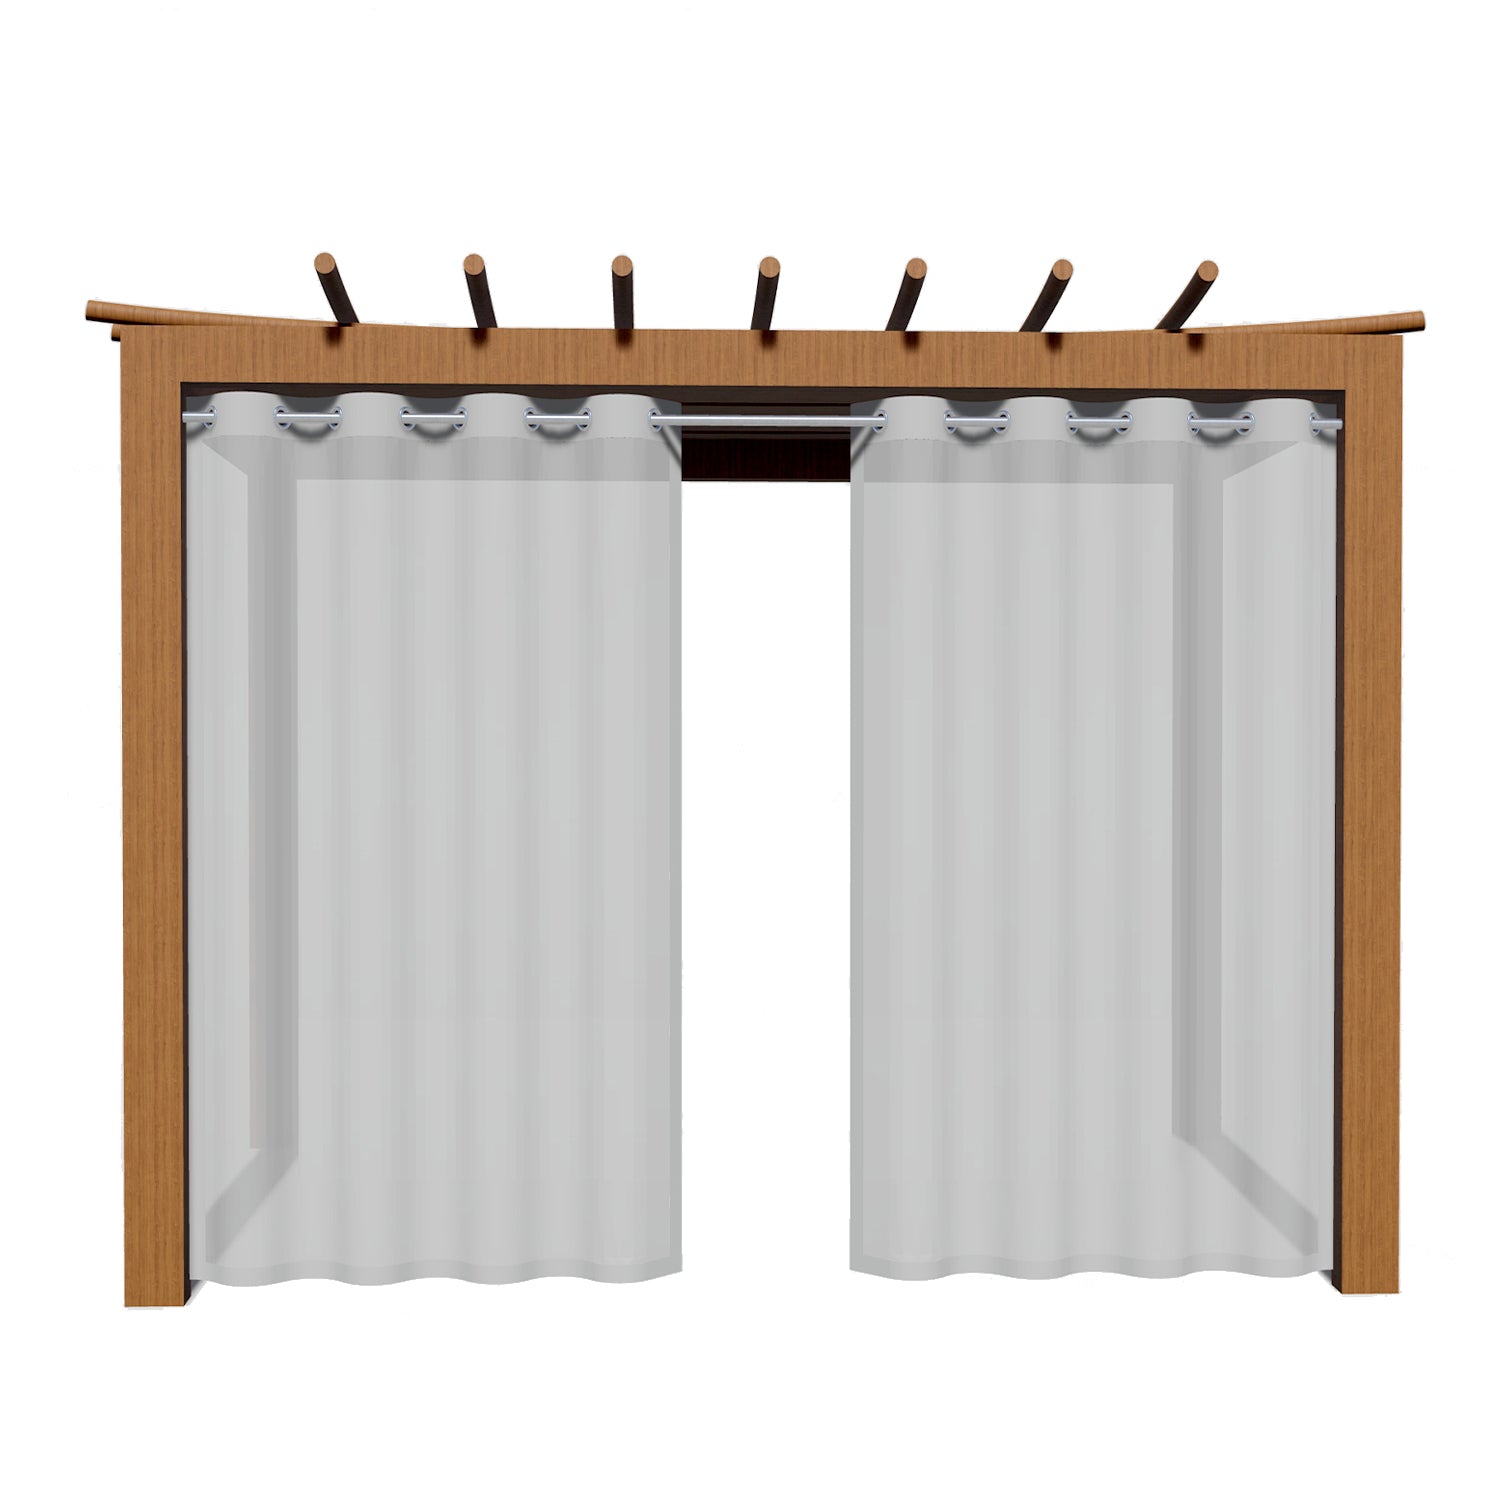 Waterproof Sun Blocking Patio Privacy Drapes with Grommets for Gazebo, Porch, Pergola, Cabana (1 Piece)